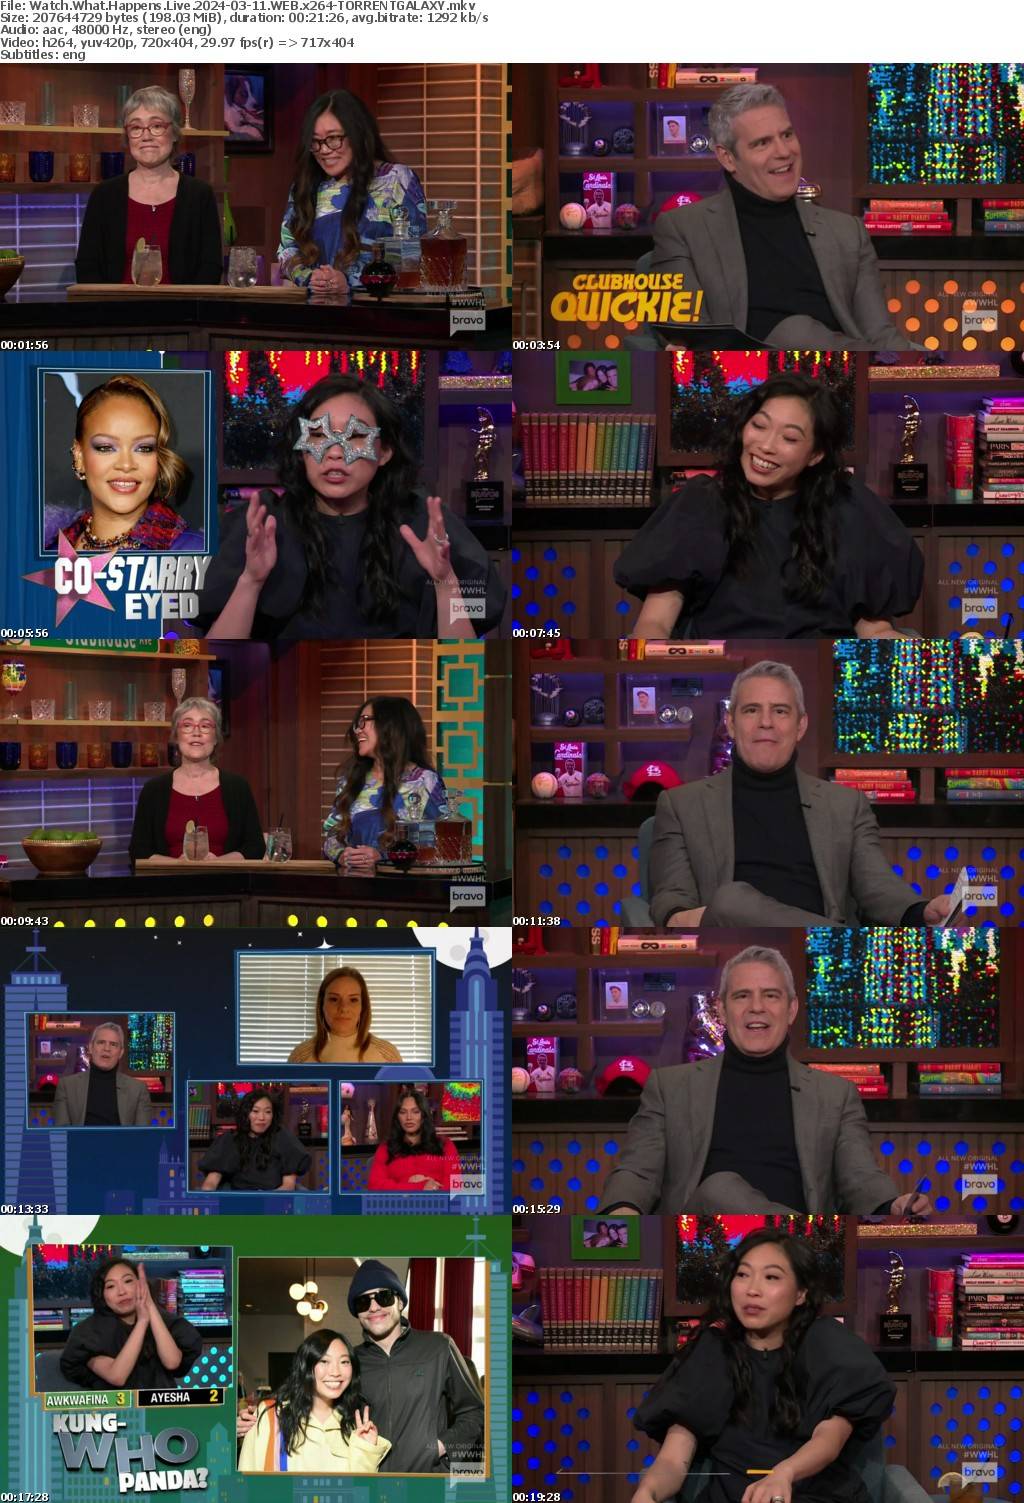 Watch What Happens Live 2024-03-11 WEB x264-GALAXY